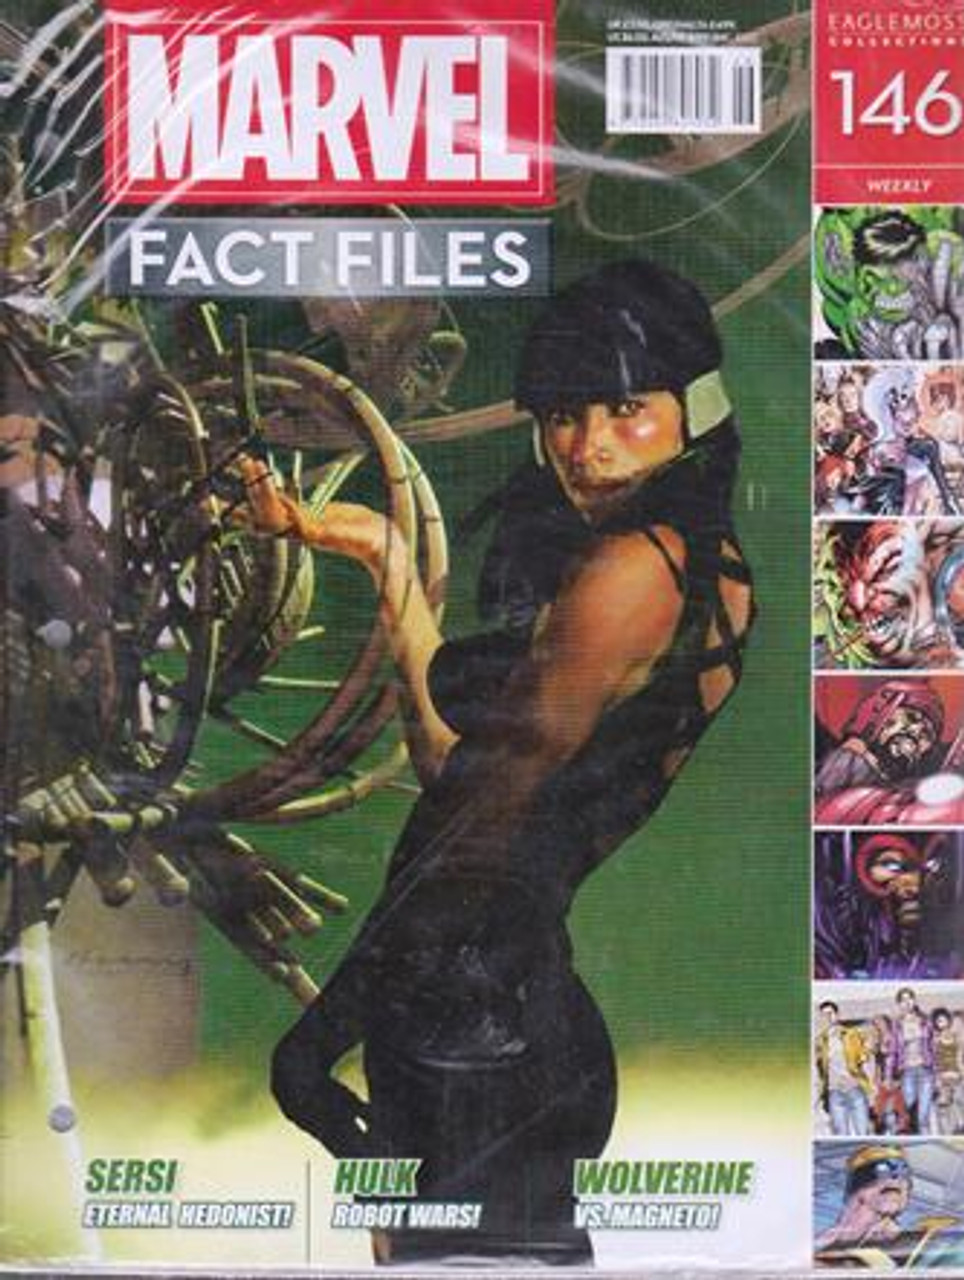 Marvel Fact Files: Vol 146 (Eaglemoss Collections)